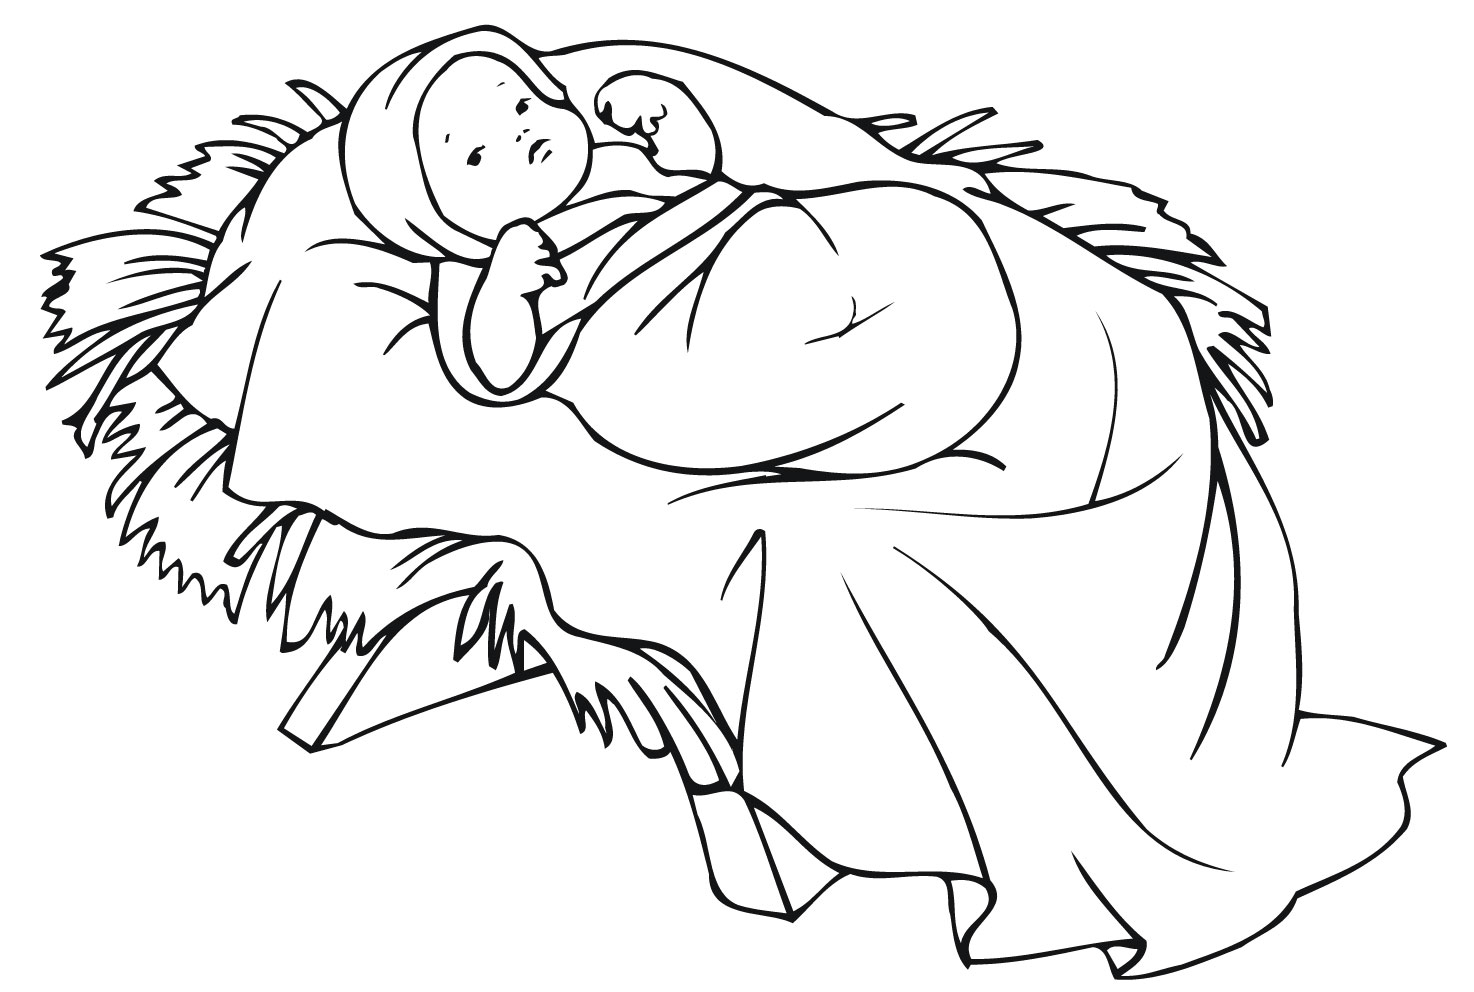 Baby Jesus Coloring Pages - Best Coloring Pages For Kids